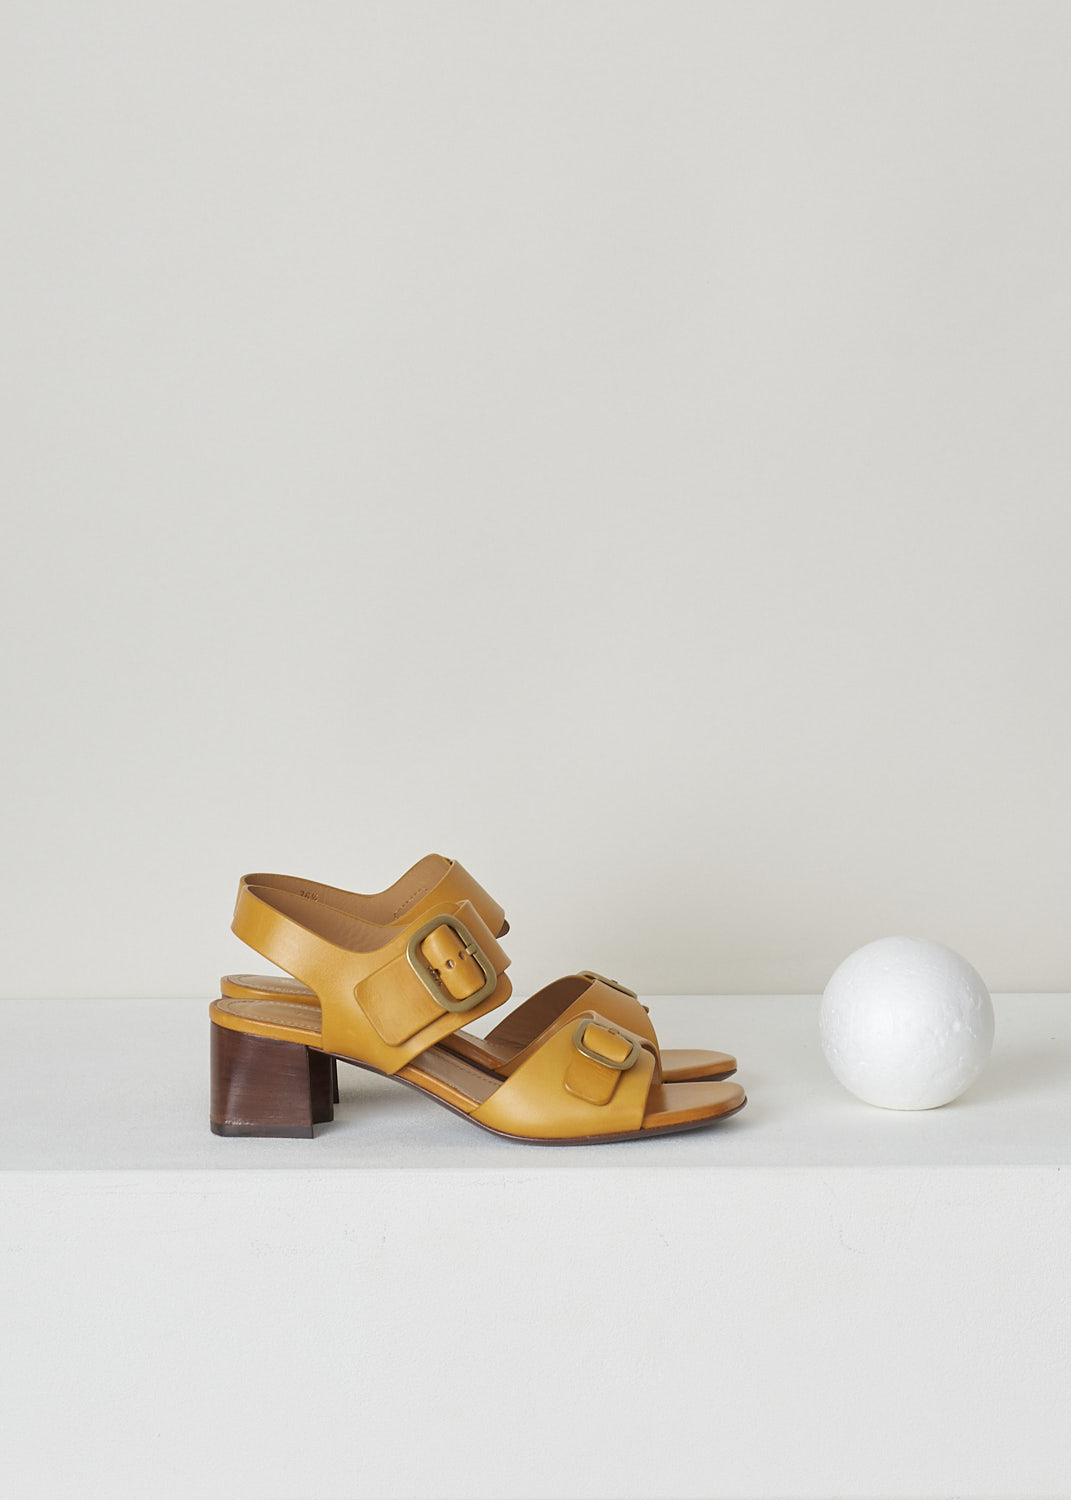 TODS, ORANGE BUCKLE SANDALS WITH HEEL, XXW04J0FH60NHVG816_SAND_CUOIO_MANDARINO, Orange, Yellow, Side, These orange heeled sandals have a double buckle-strap fastening with gold-toned buckles, a slingback strap and a squared open toe. 
